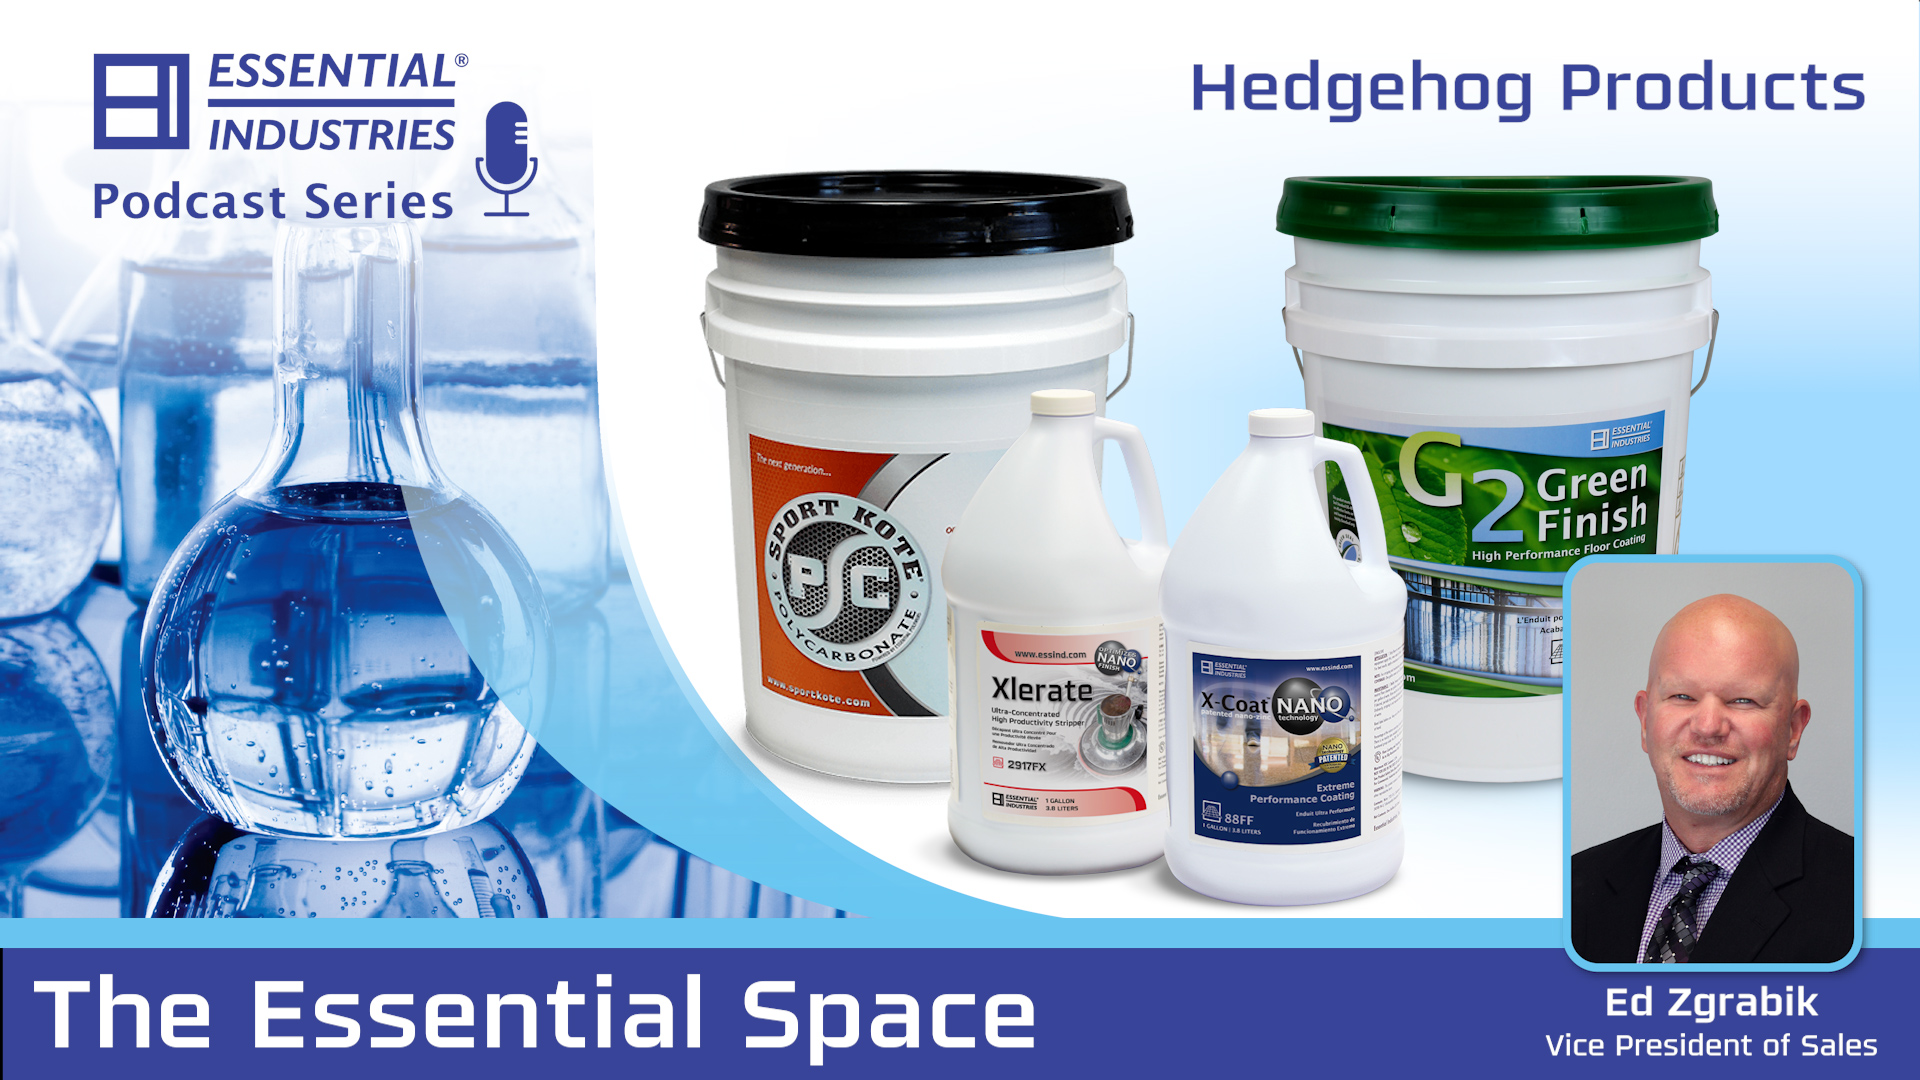 Hedgehog Products